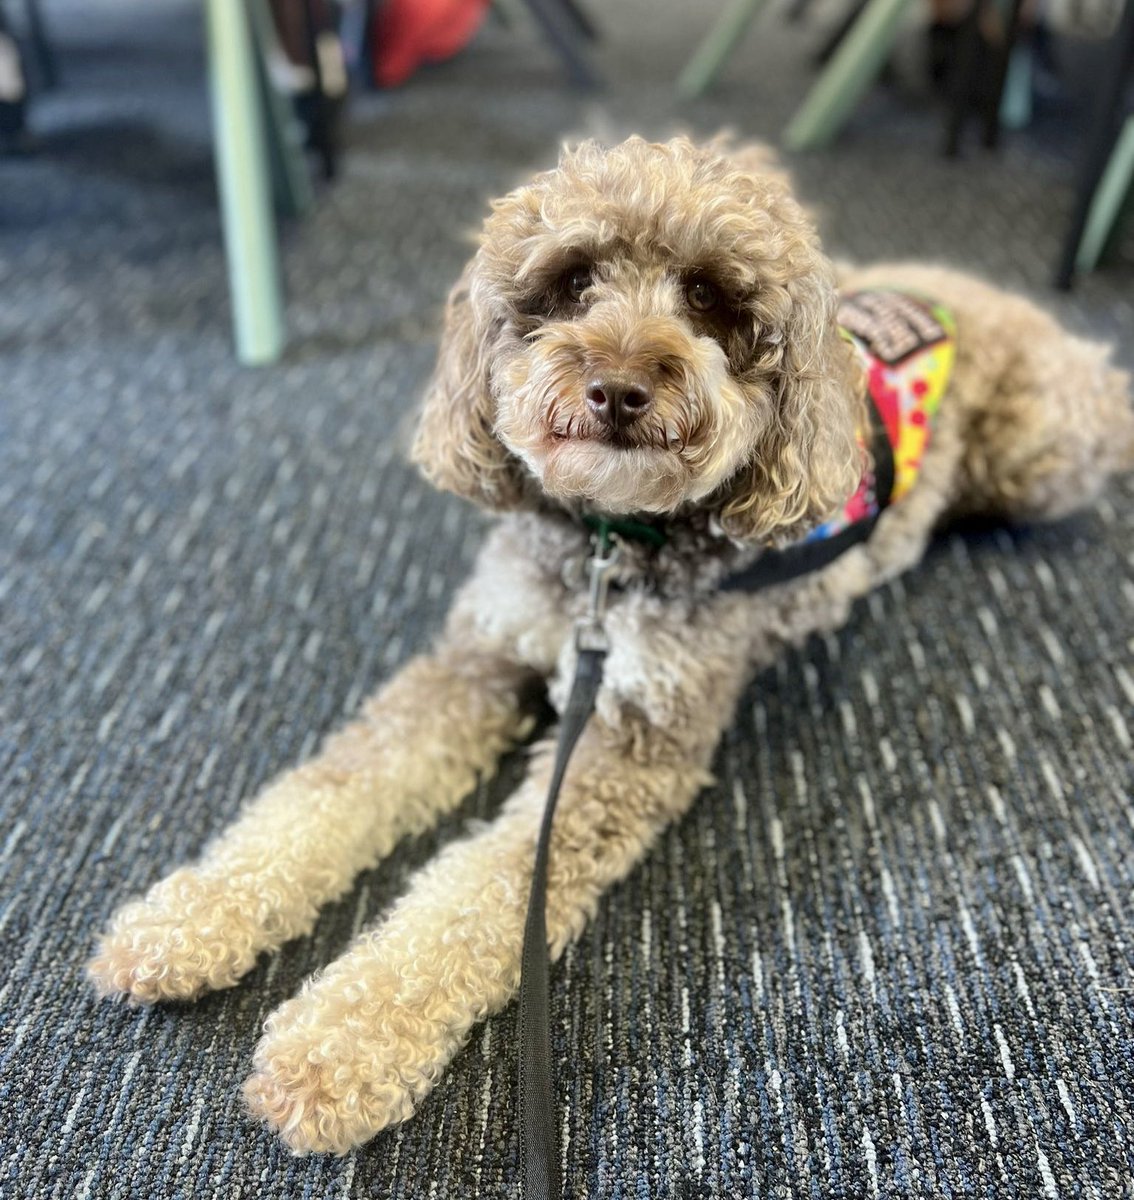 Mowgli’s smile says that he is so happy to be back at school and helping his friends learn. #Mowgli #schooldog #dogsofeducation #lovewhatwedo #Smile #dog #cute